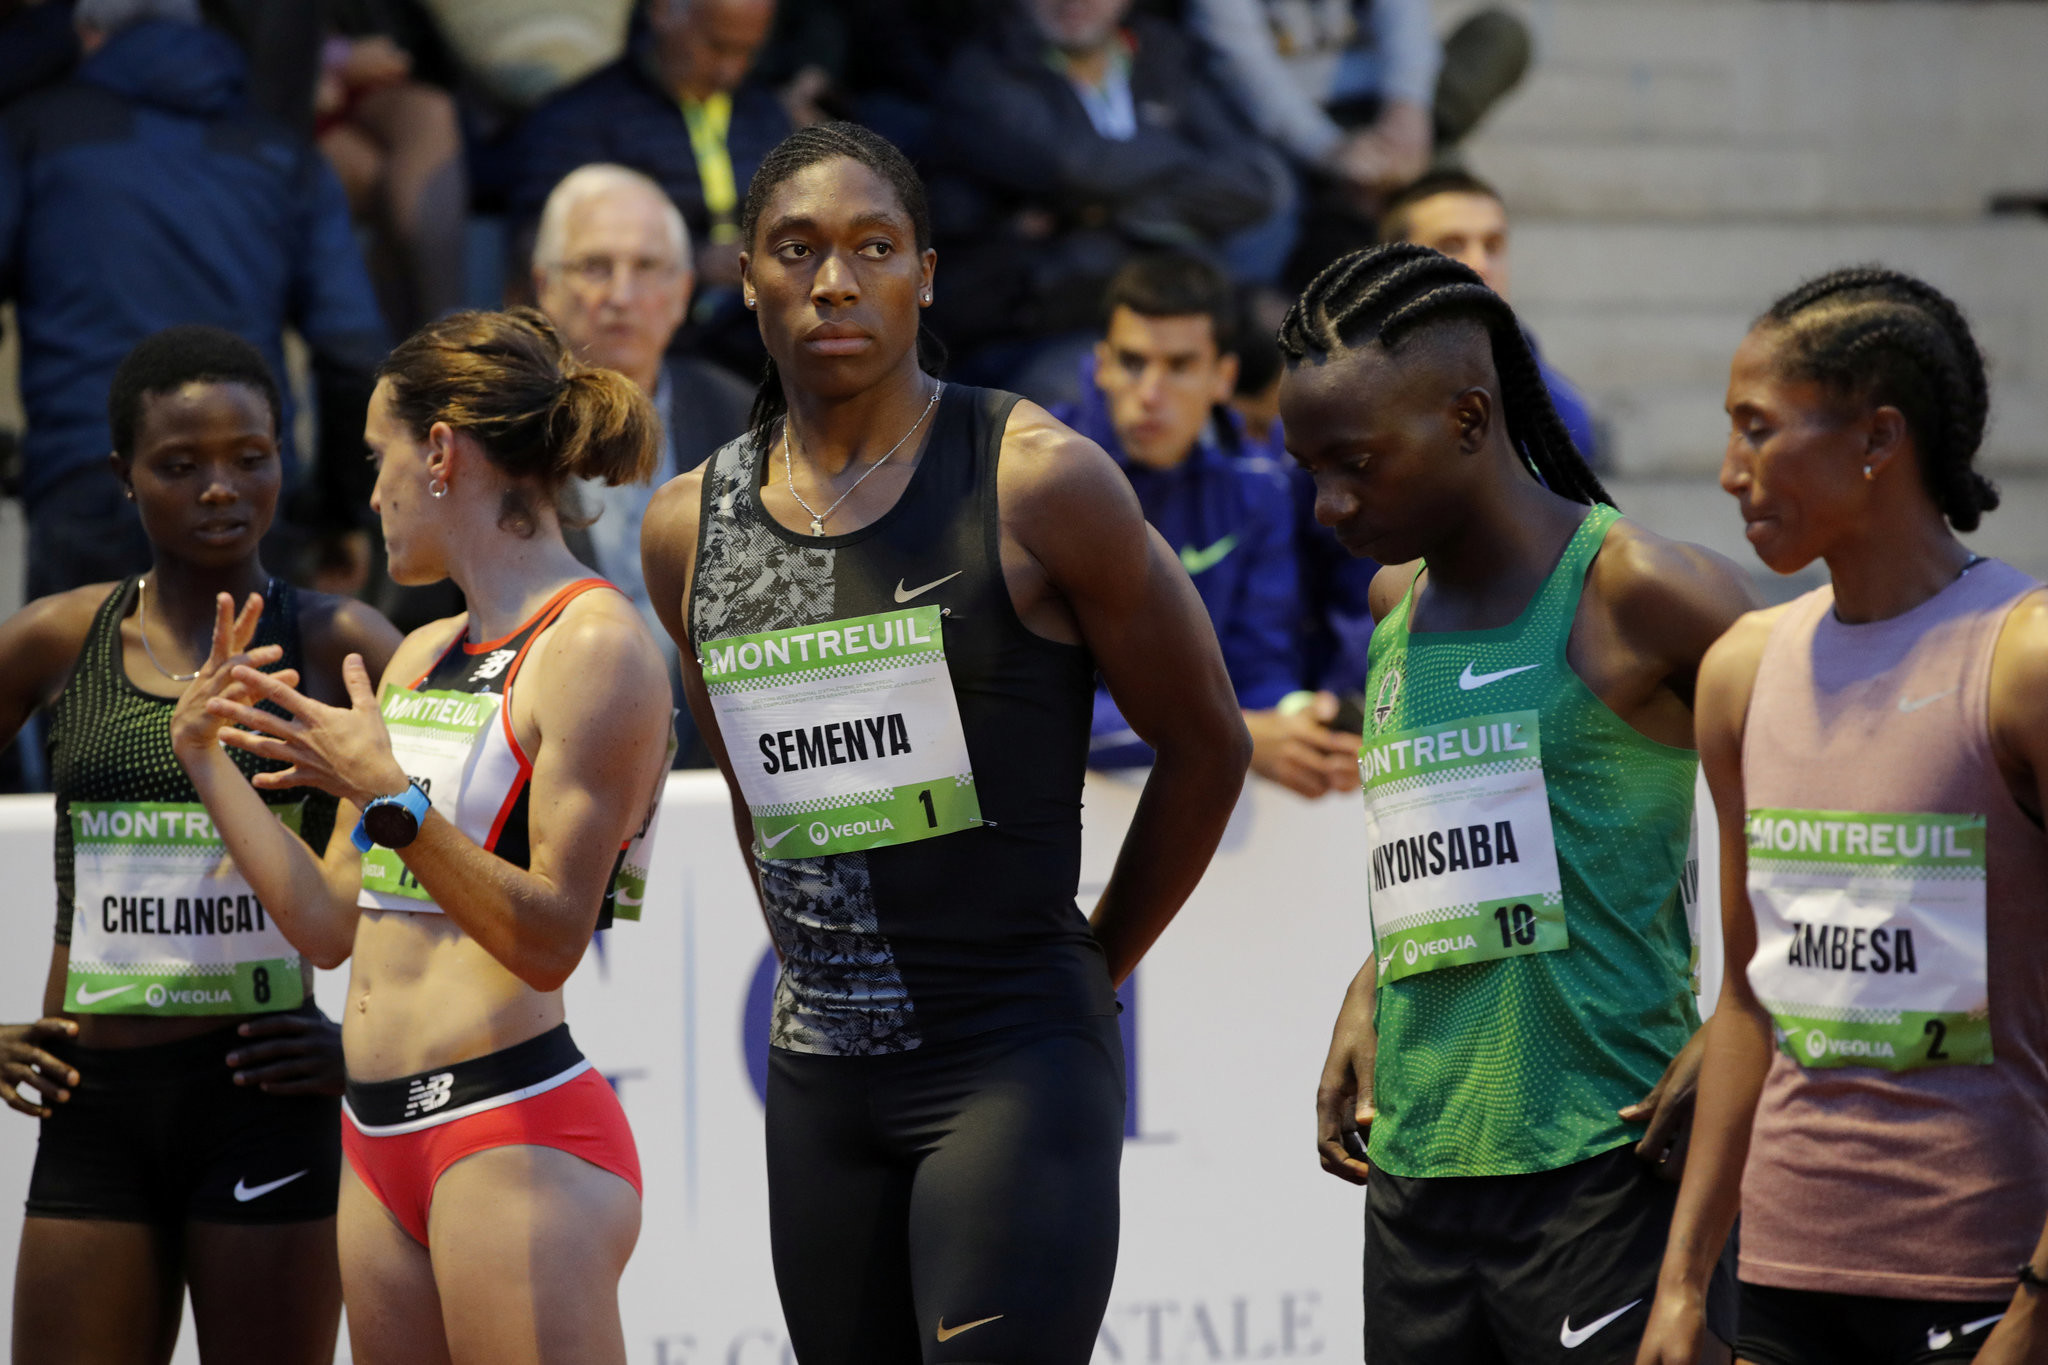 Time is running out for Caster Semenya as African Championships have been cancelled